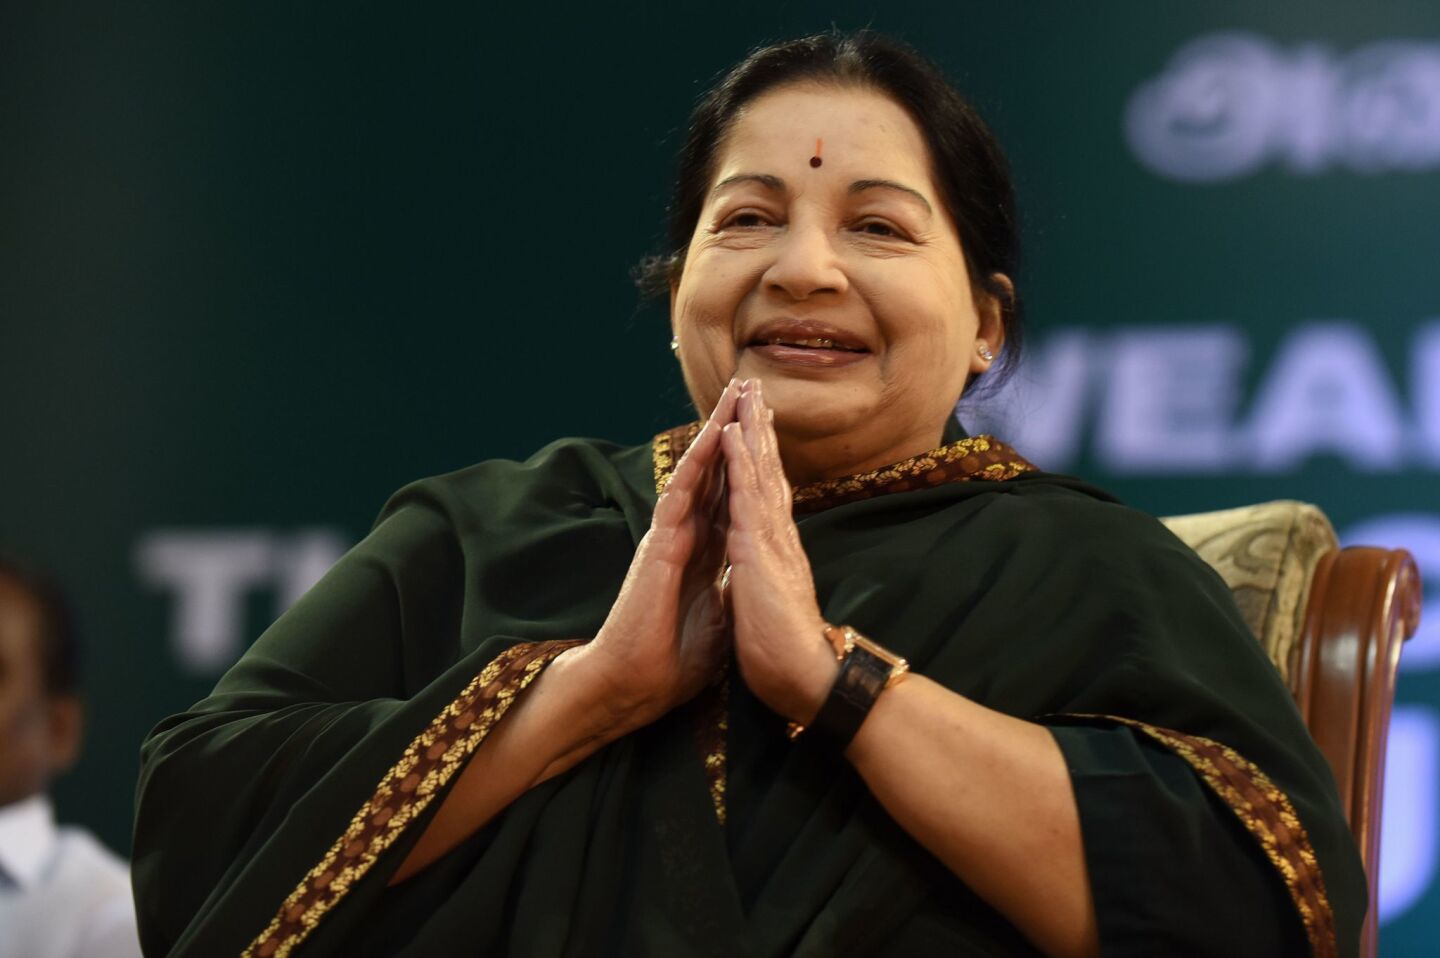 The hugely popular south Indian actress later turned to politics and became the highest elected official in the state of Tamil Nadu. She was 68. Full obituary